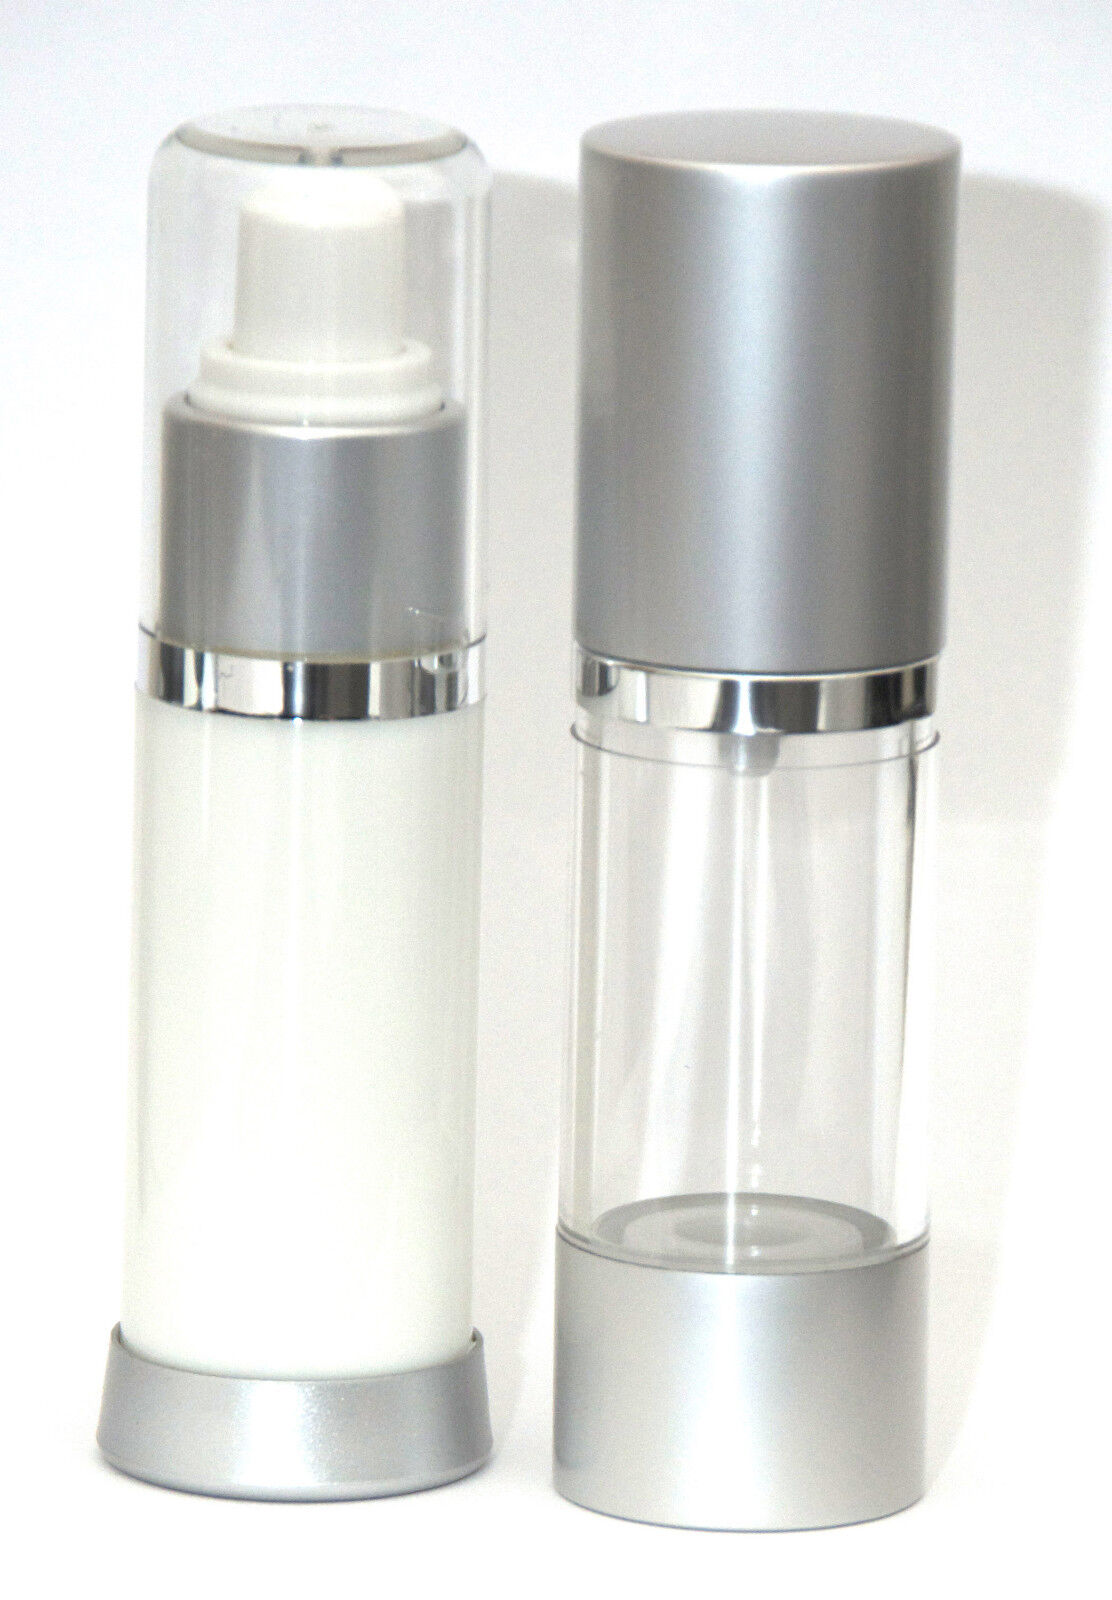 TWO 1 Oz (30 ml) Airless Bottles w/ pump & cover